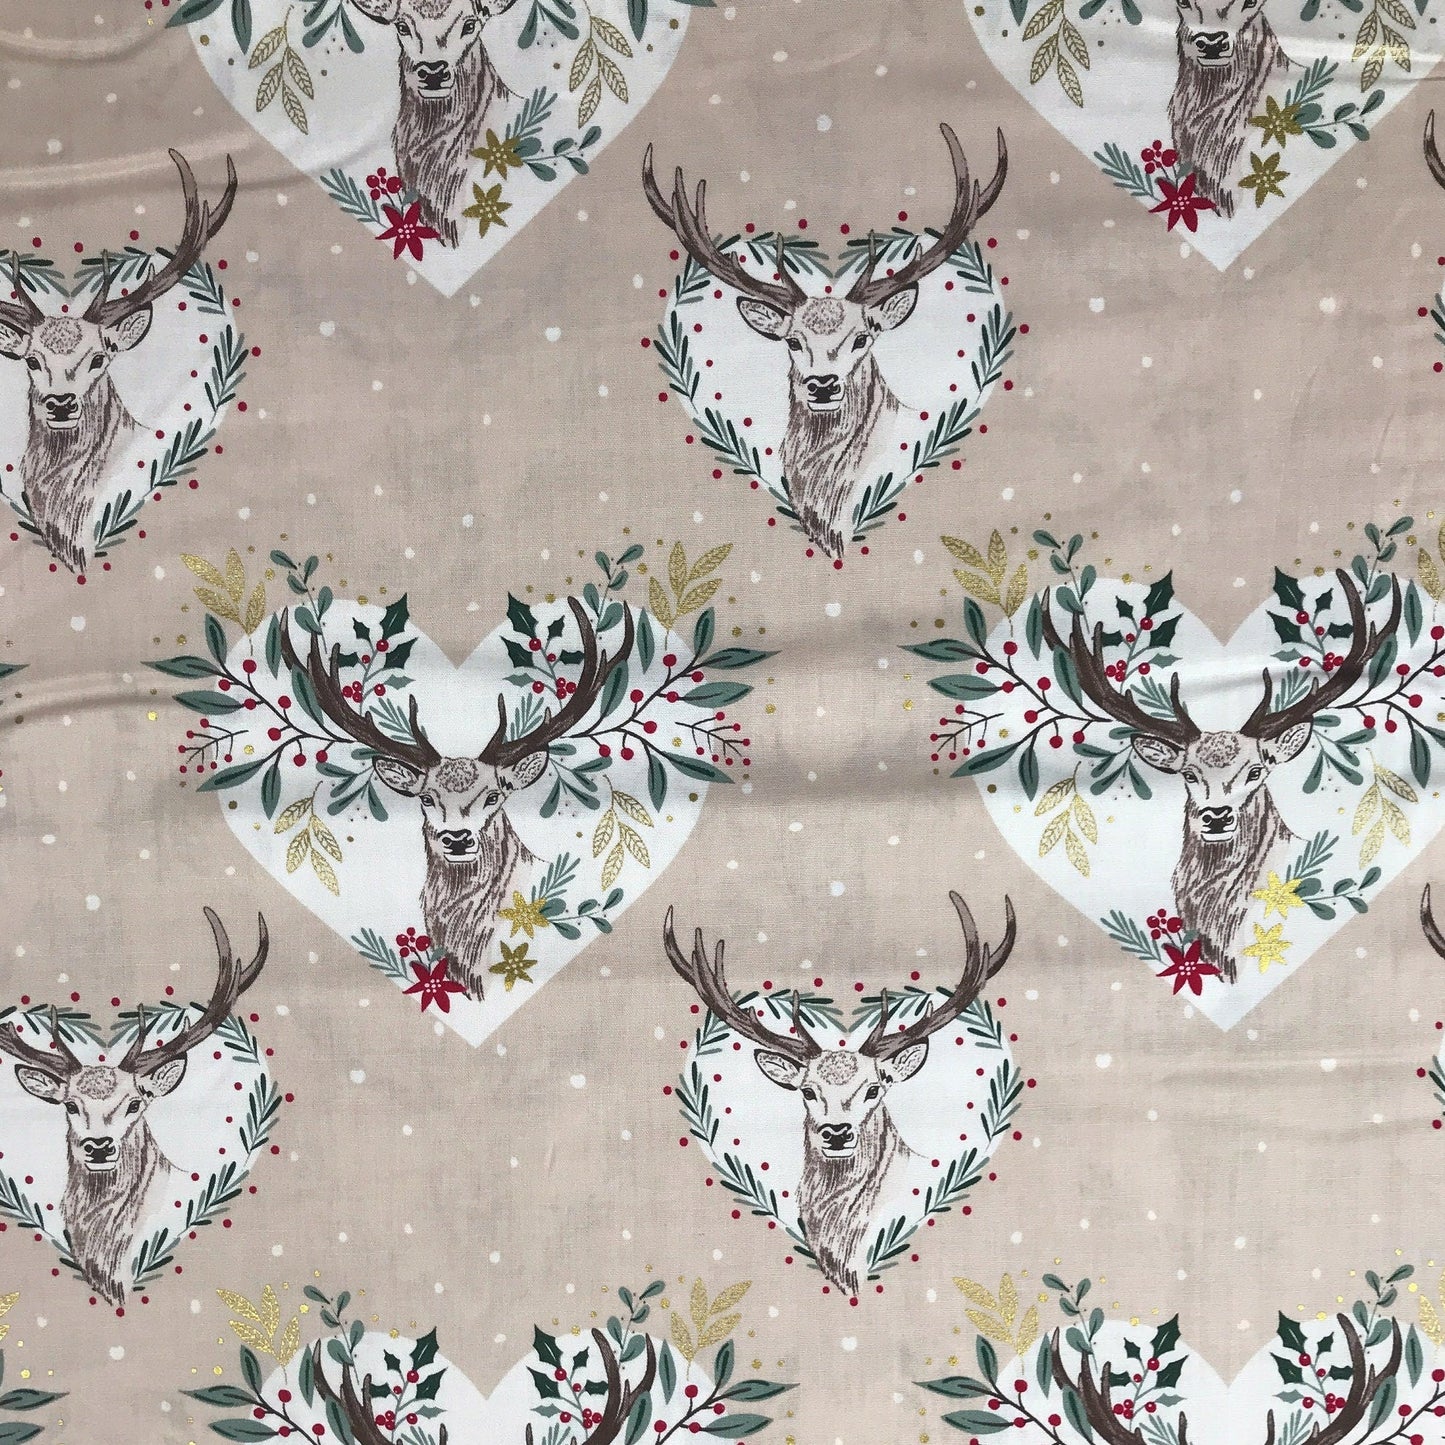 Stag METALLIC Gold Foraging in the Forest Victoria Louise The Craft Cotton Co Quilters Cotton Fabric Fetish